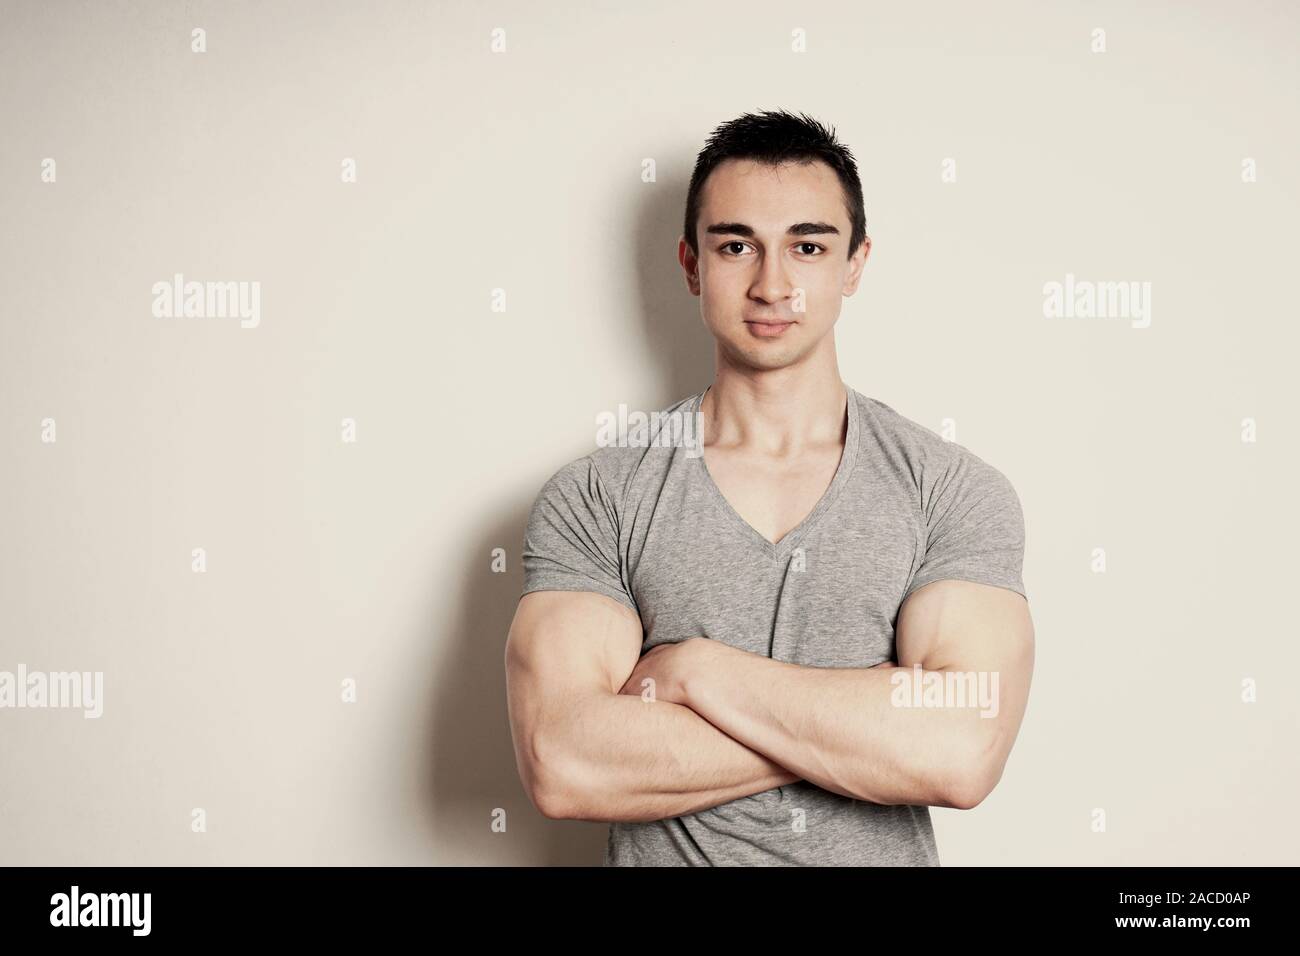 muscular young man with arms crossed standing against wall with copy space. vintage filter effect. Stock Photo